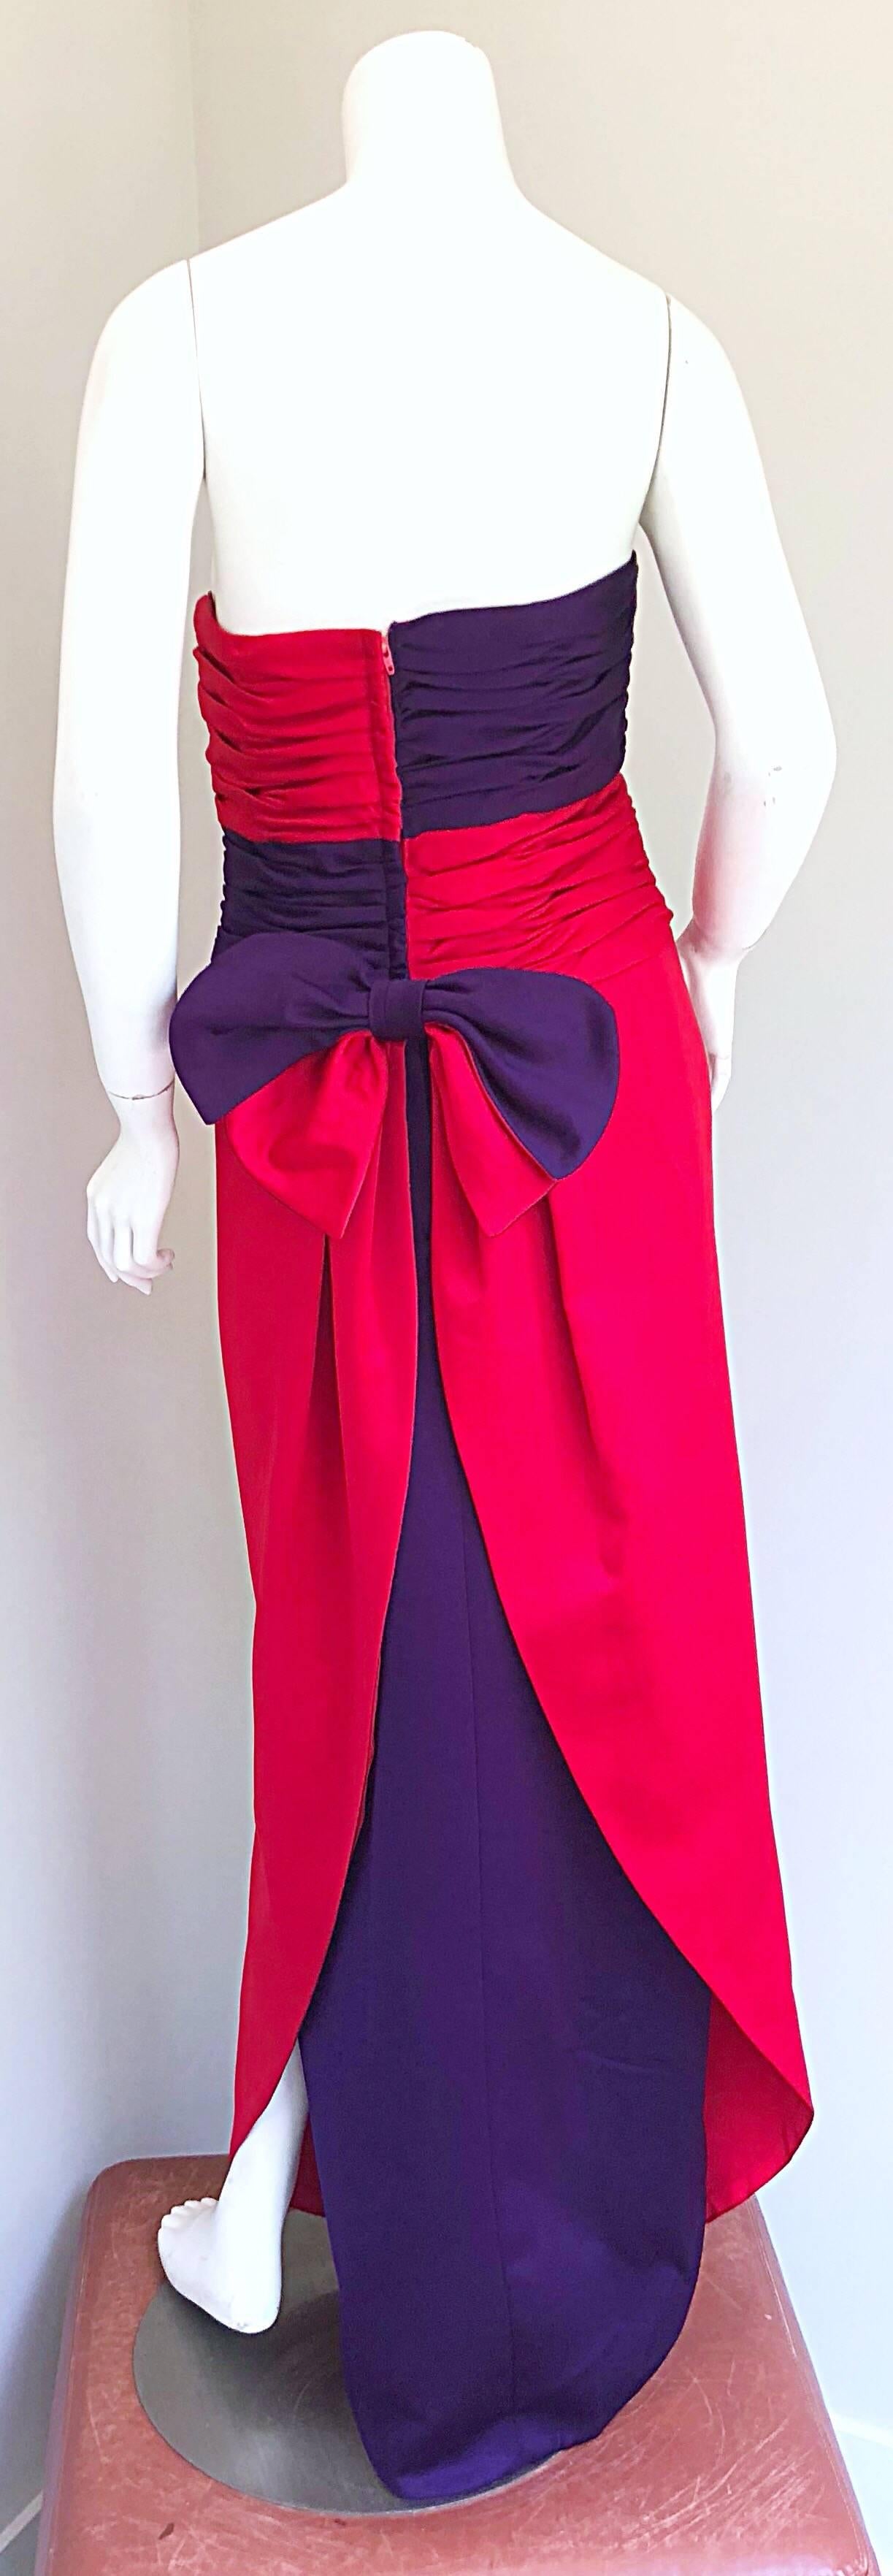 Elegant vintage VICKY TIEL COUTURE for BERGDORF GOODMAN red and purple silk satin strapless evening gown! Features flattering ruched panels in a regal purple and lipstick red. Soft curved him with a purple satin under skirt revealed in the back with